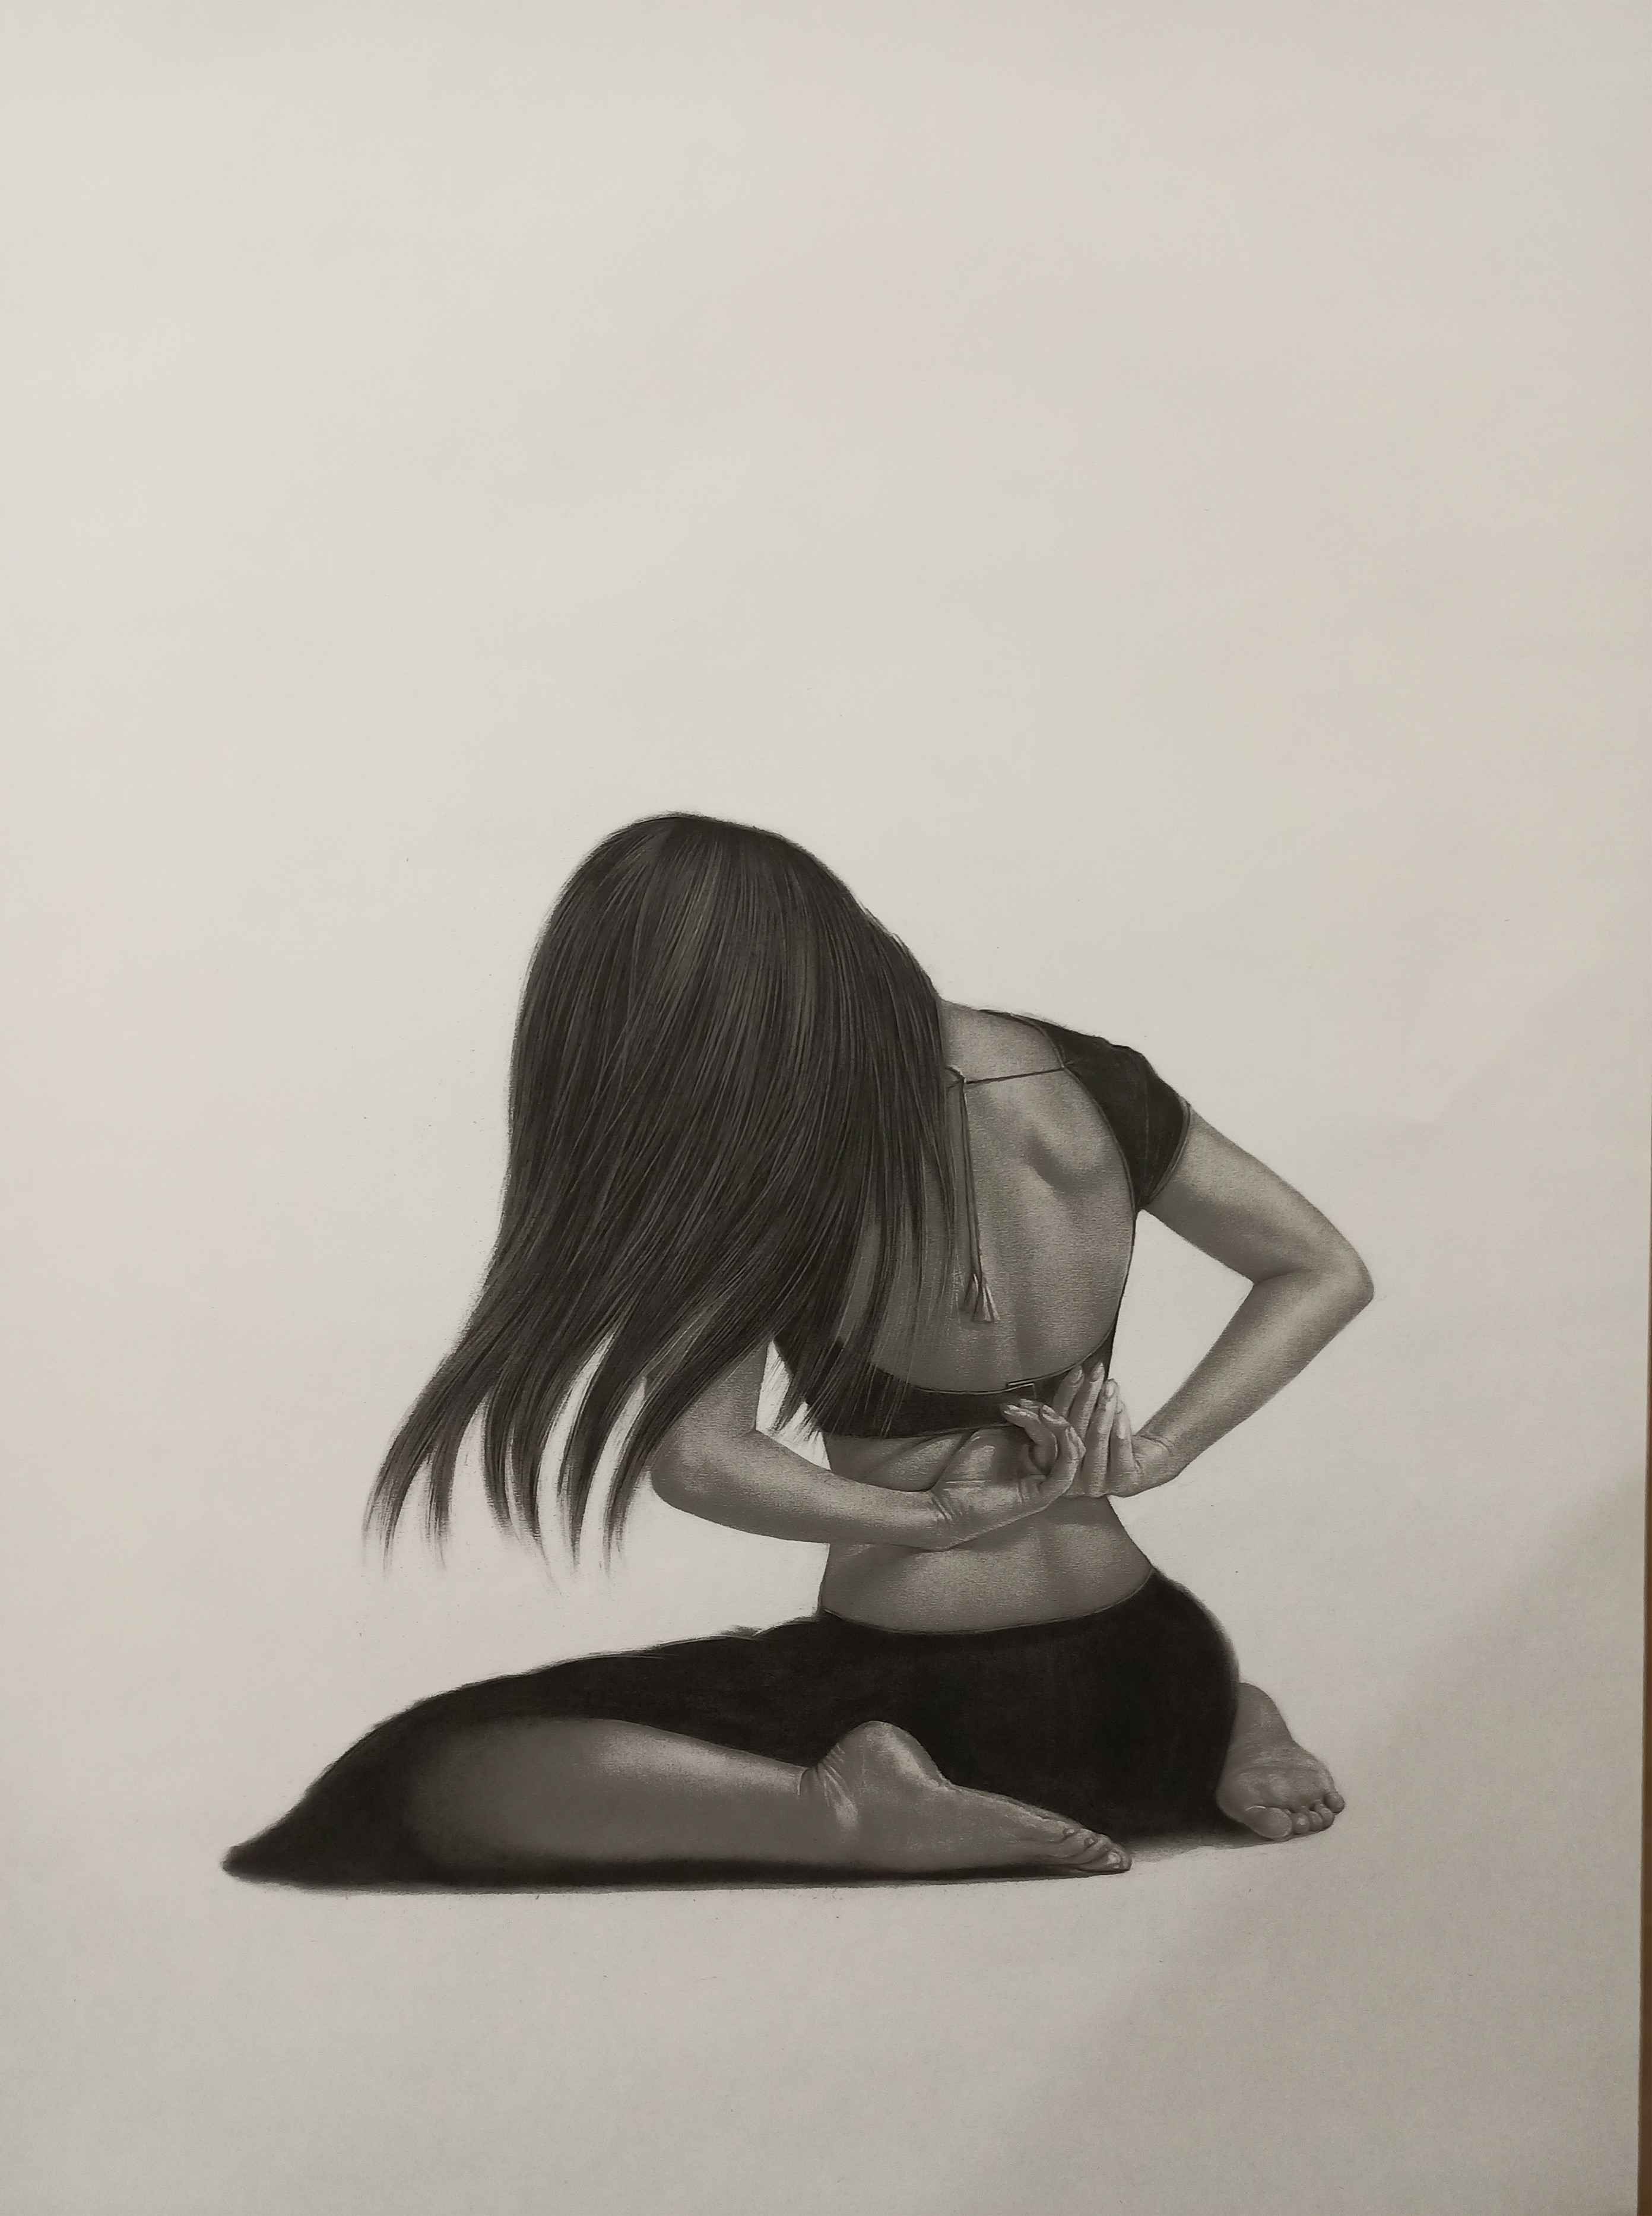 Artist: Ali Karimi<br> Title: UNTITLED 01<br> Medium: Graphite andCharcoal on paper<br> Size: 43x30 inches